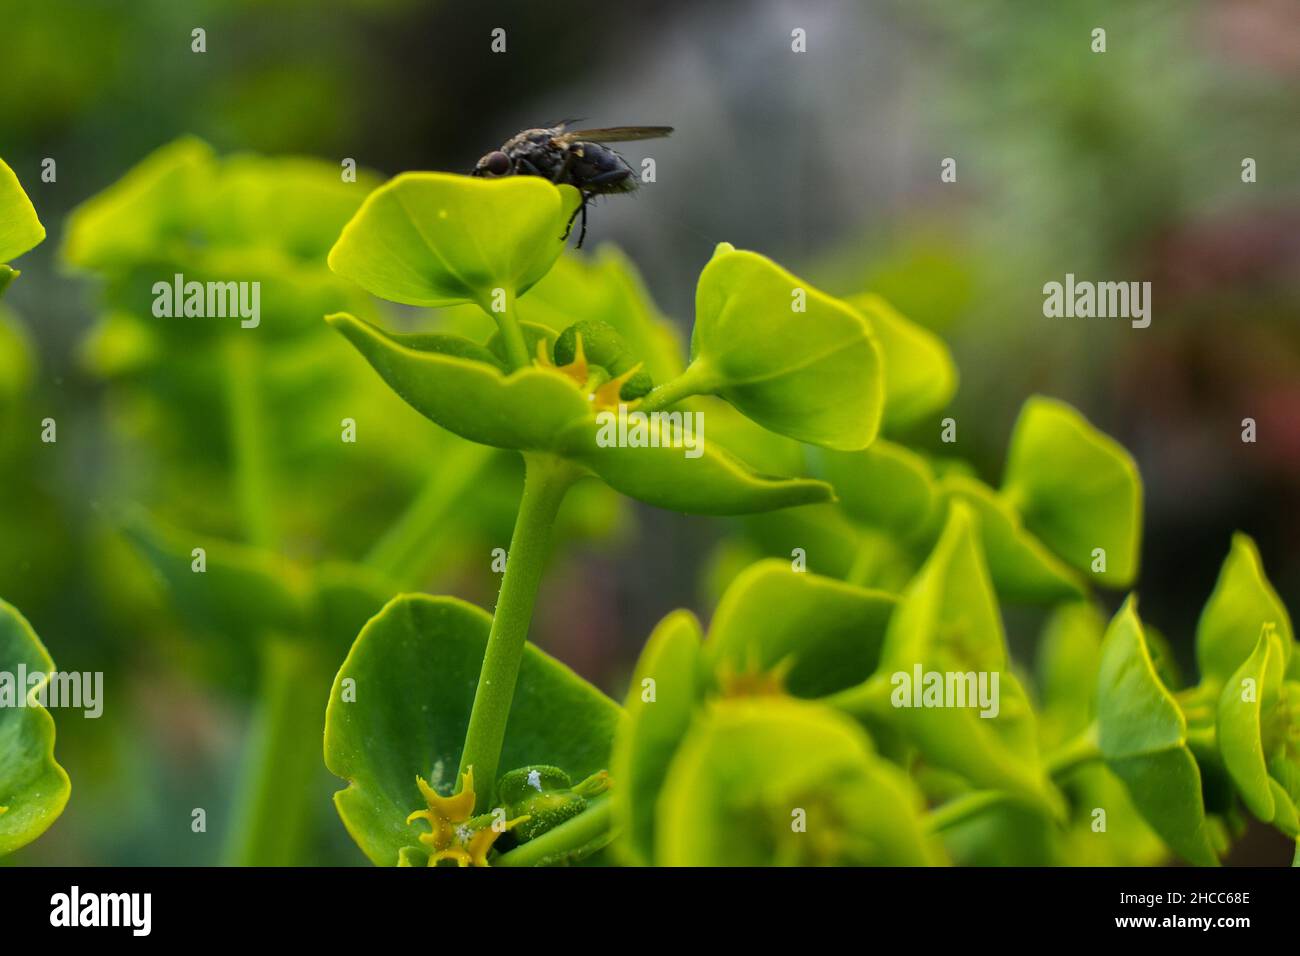 Fly perched on the pine spurge plant in the blurred background Stock Photo